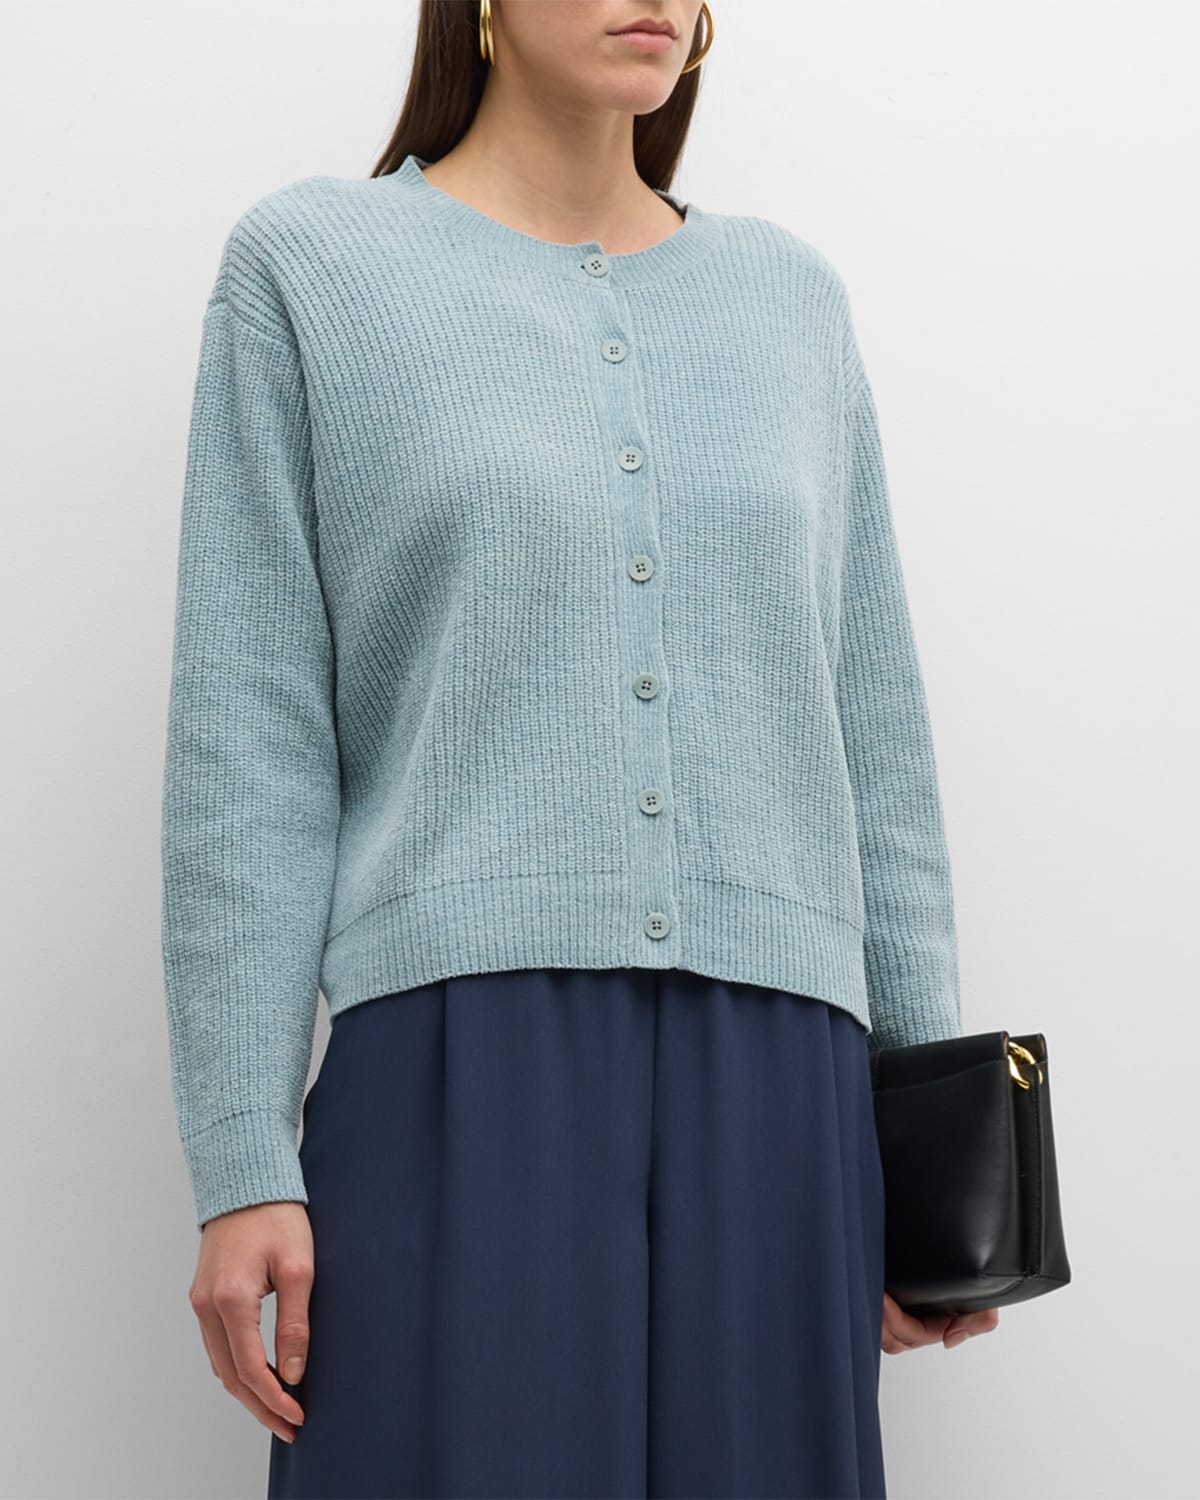 EILEEN FISHER RIBBED BUTTON-DOWN CHENILLE CARDIGAN